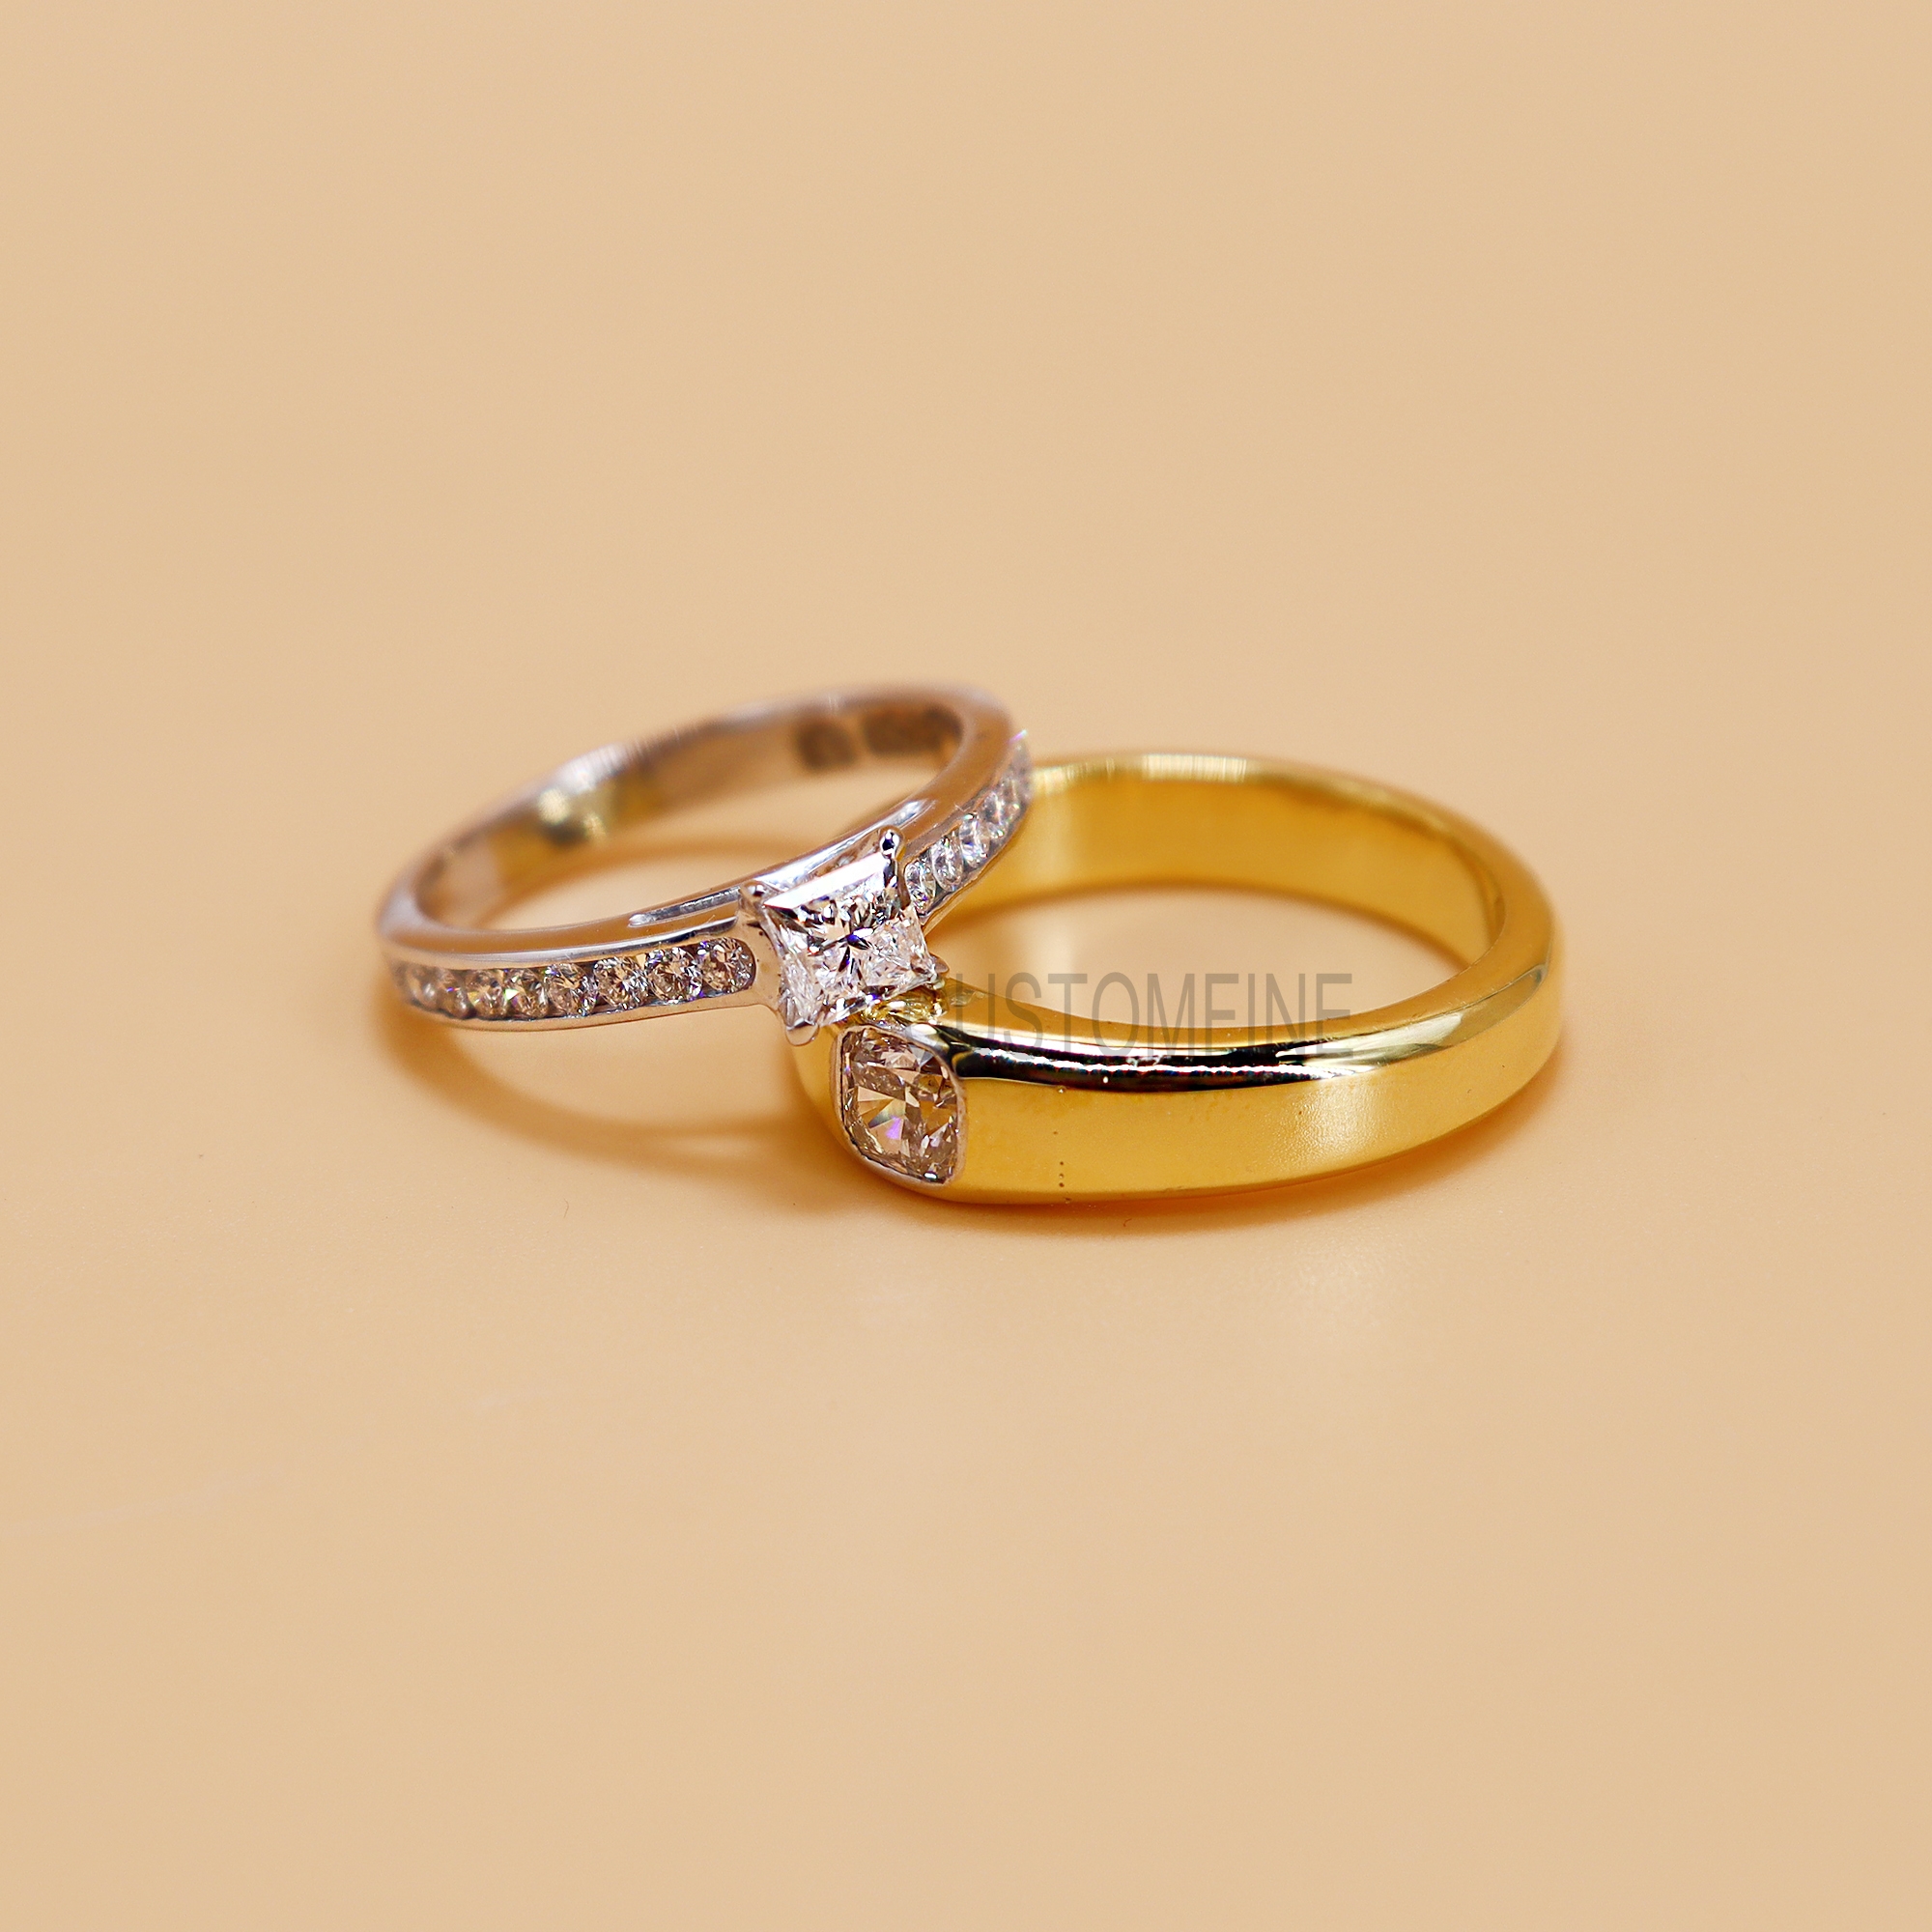 Uloveido Matching Couples Wedding Rings Set for Him and Her - Wedding  Engagement Bands Lovers Gifts for Boyfriend and Girlfriend J002|Amazon.com